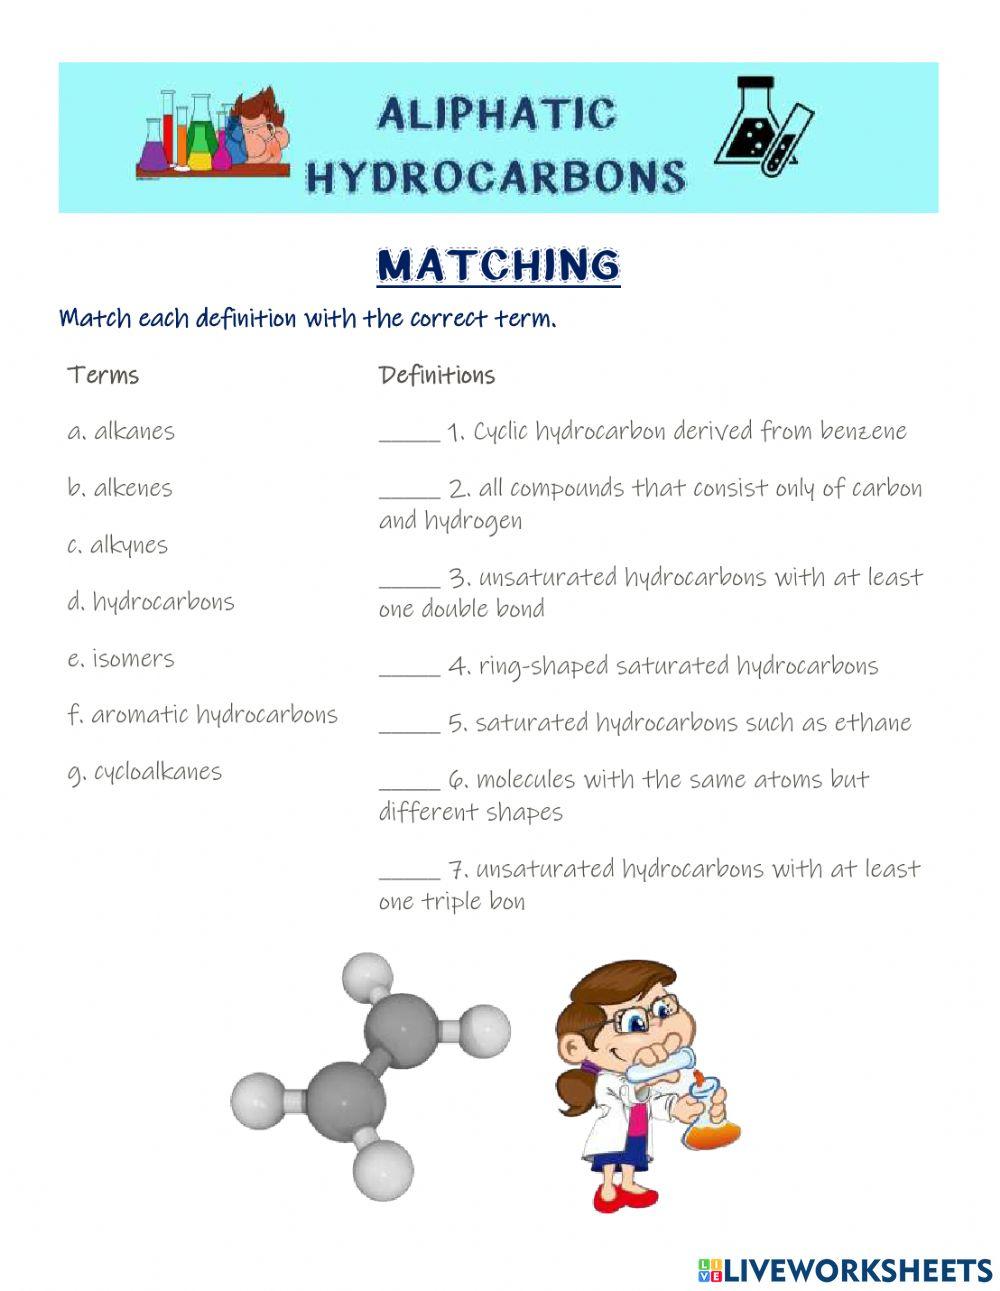 Aliphatic hydrocarbons Matching